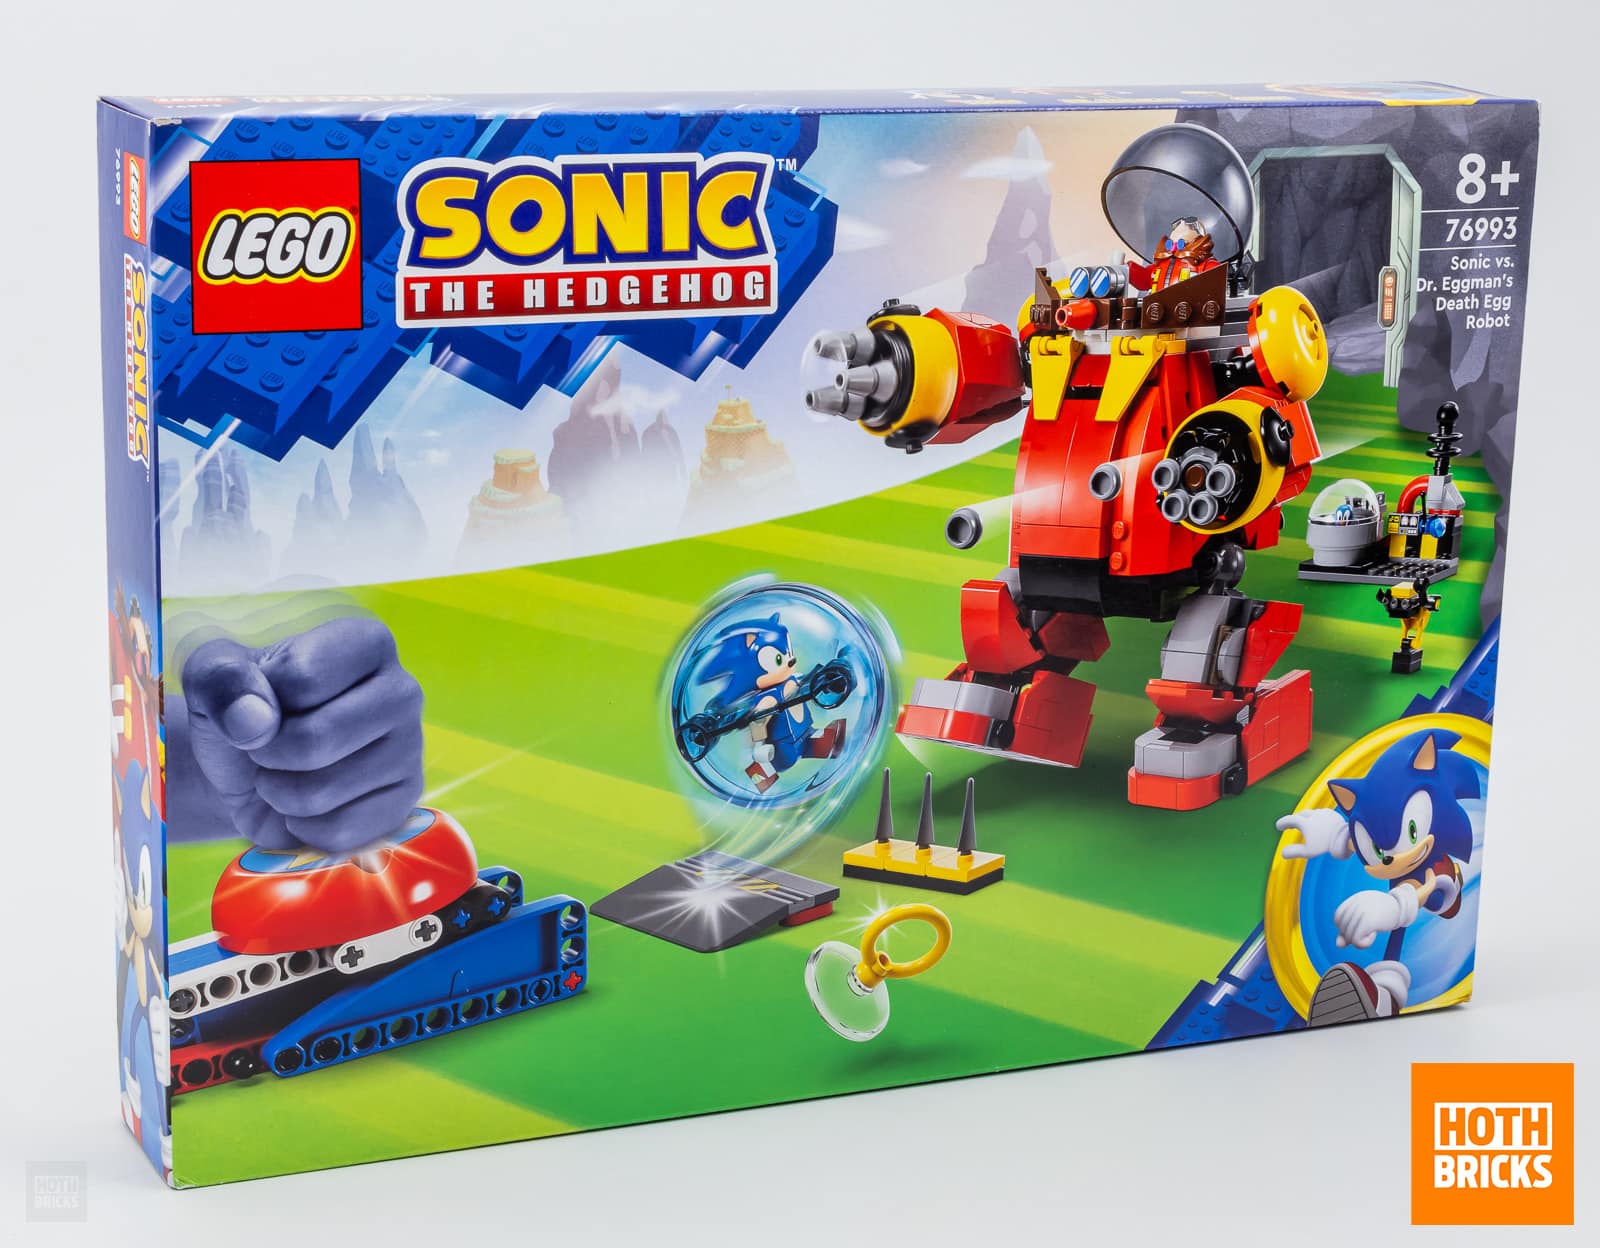 ▻ Competition: A copy of the LEGO set 76993 Sonic vs. Dr. Eggman's Death  Egg Robot to win! - HOTH BRICKS